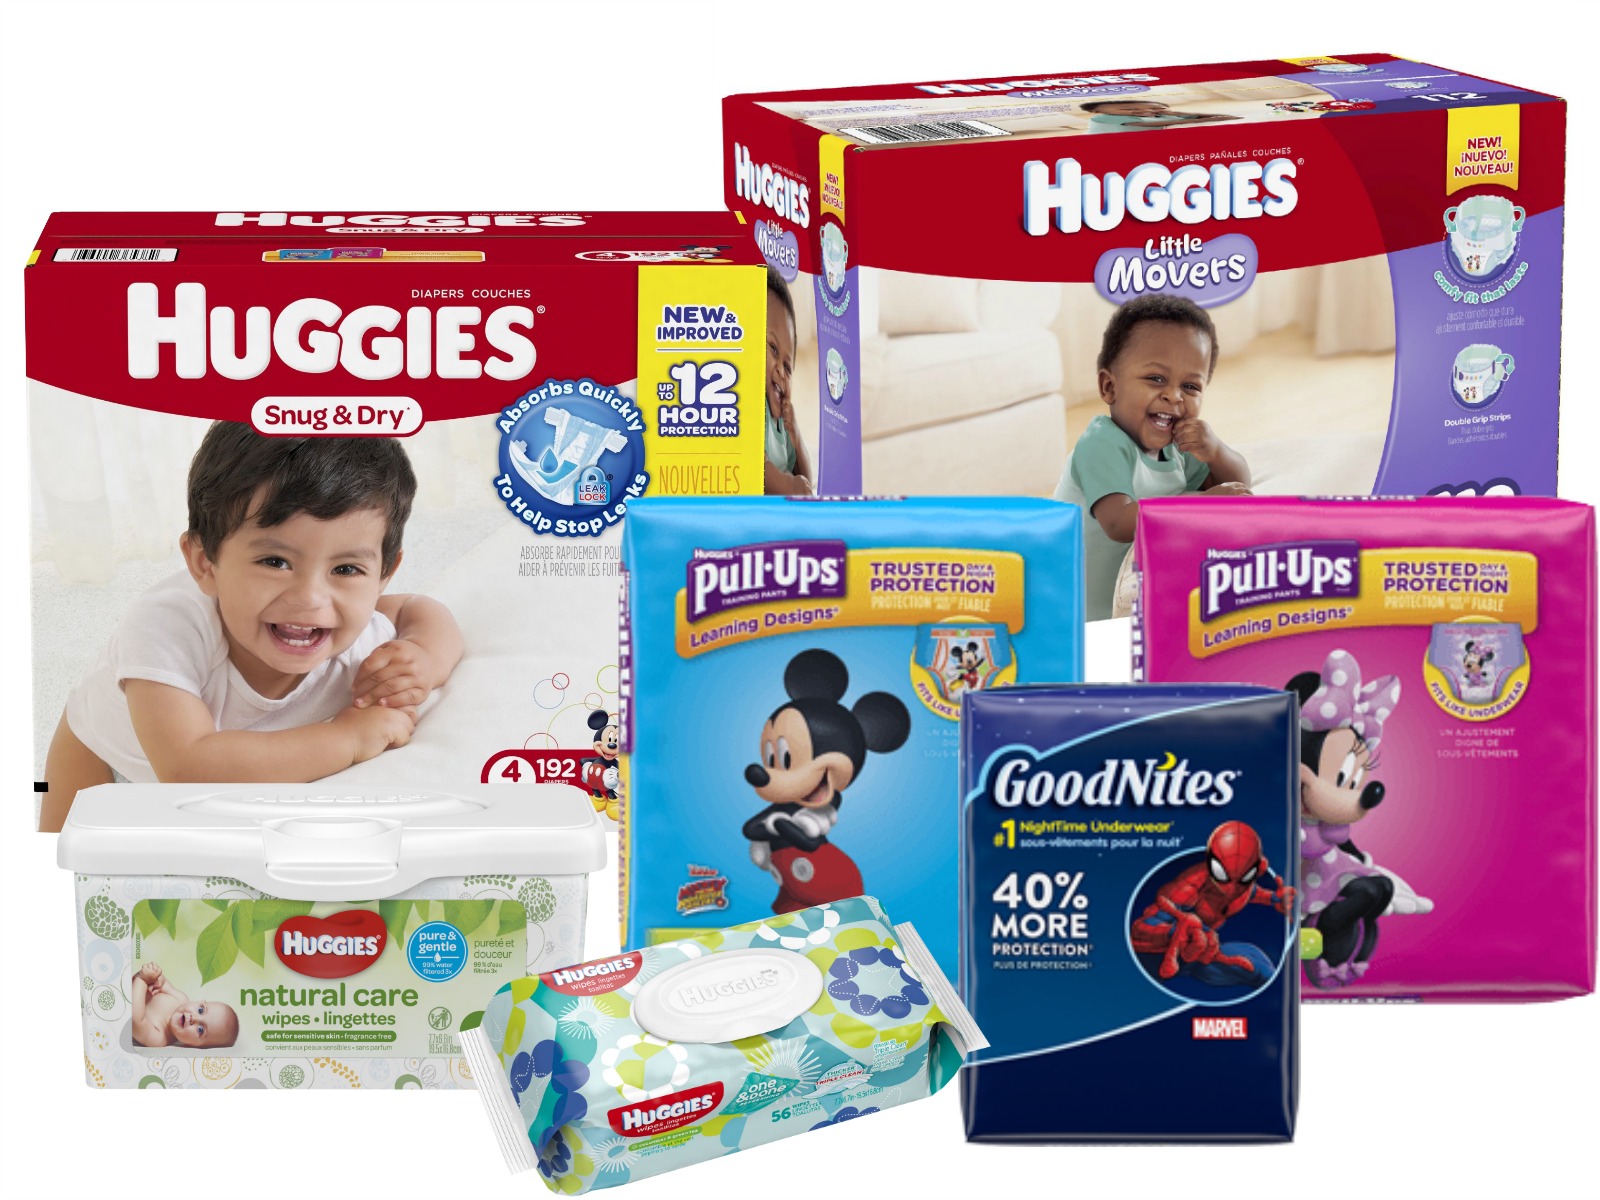 Free Instacart Delivery With A $20 Huggies, Pull-Ups & GoodNites Purchase At Publix